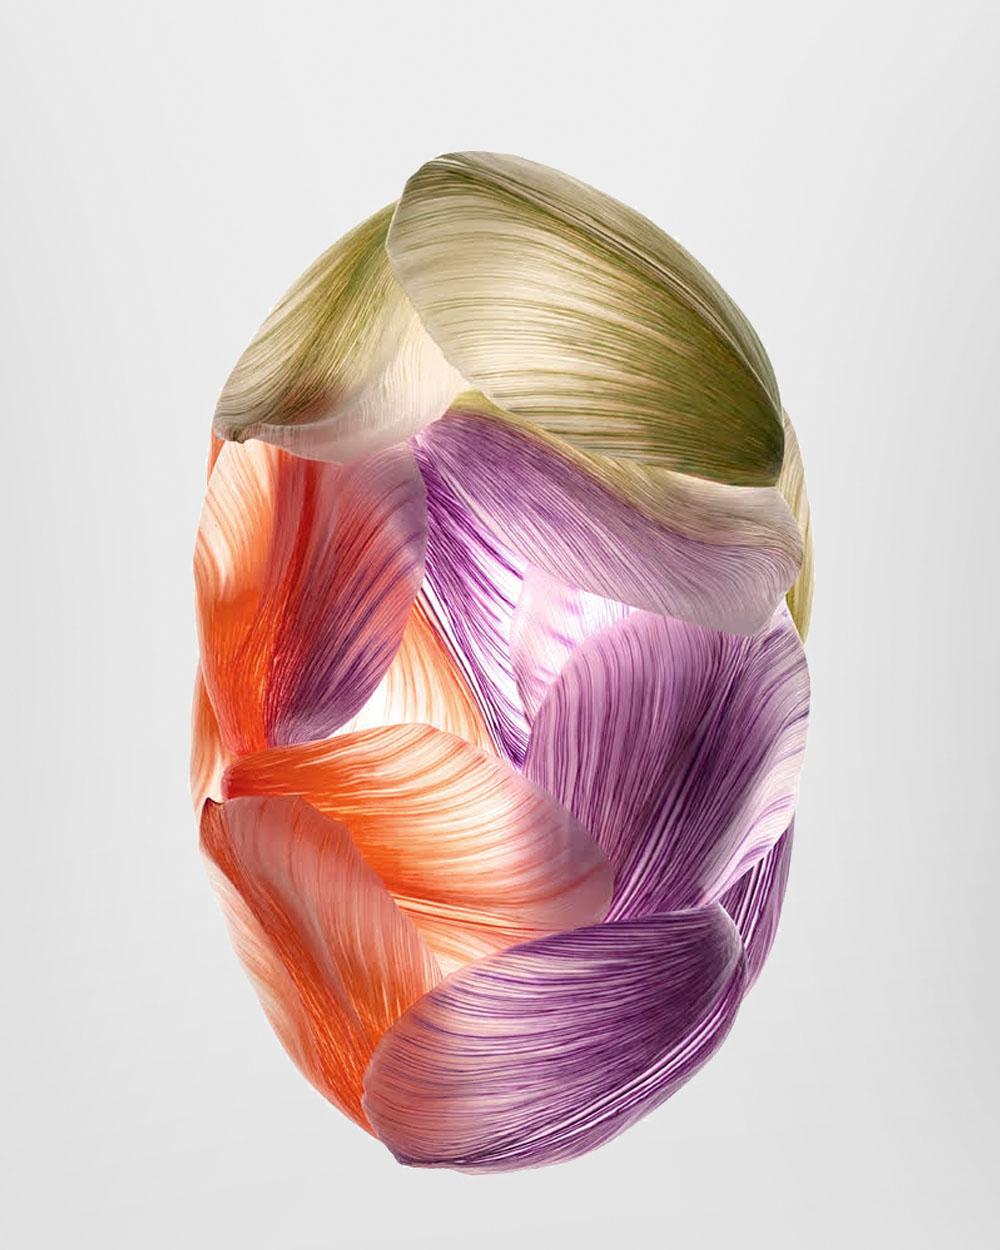 Carpet Tulip Mania by Hilde Koenders pictures a bundle of lucid coloured petals. The carpet is inspired by Hilde Koenders' artistic work, where she feeds pigmented water to tulips. The water colours the petals, laying the delicate veins bare. Tulip